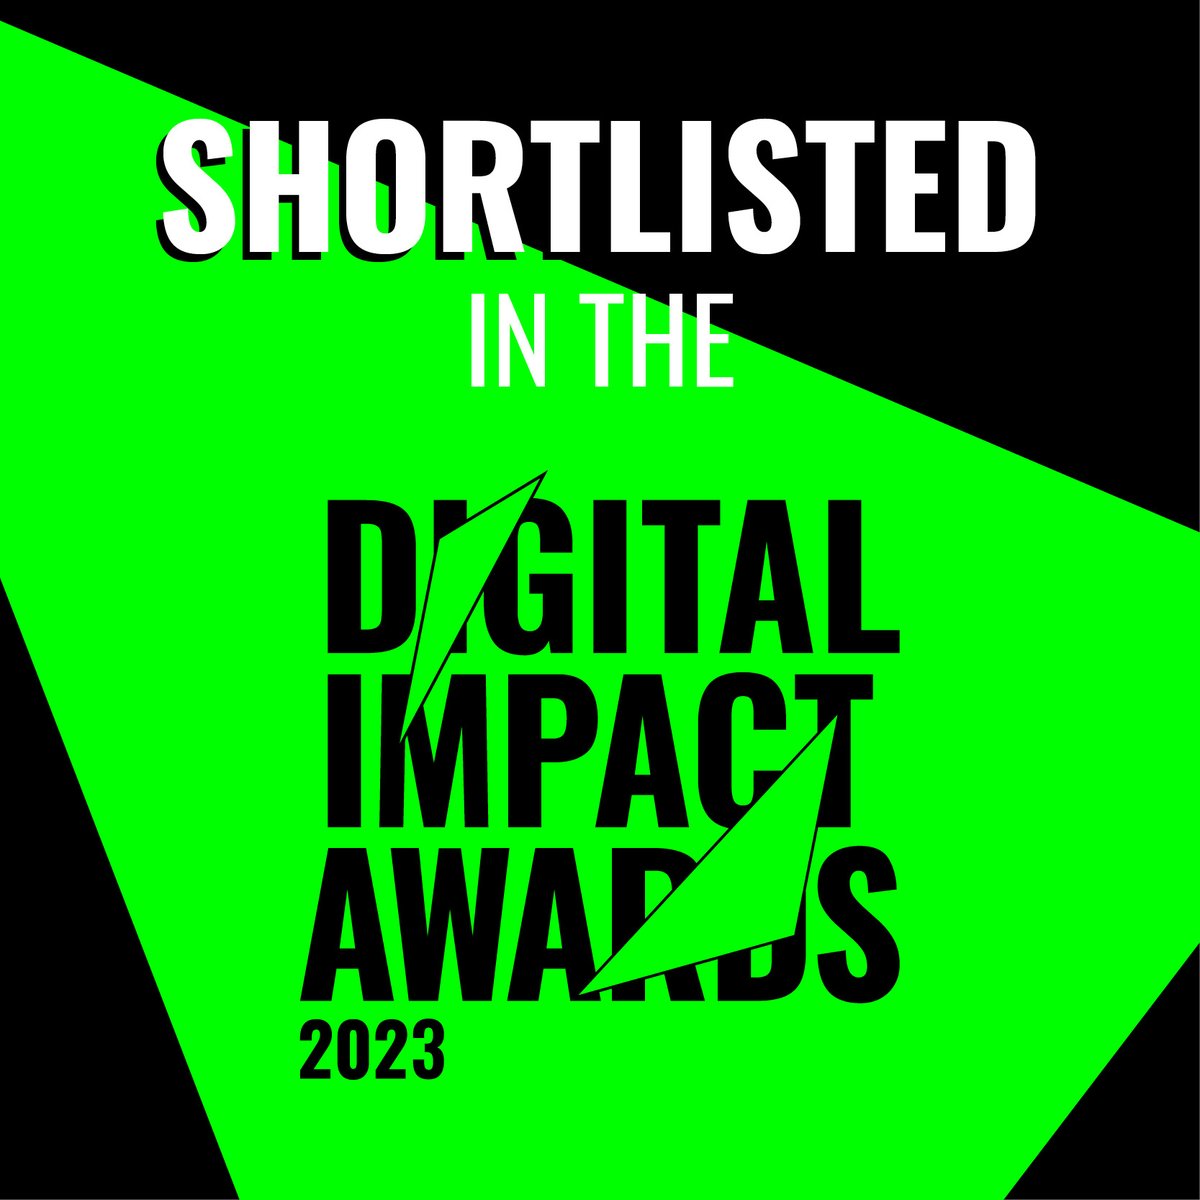 We are delighted to be shortlisted in the 'Best Use of Audio' category at the Digital Impact Awards 2023. This recognition highlights how our team made the best use of audio to deliver impactful #podcasts. Listen to our latest podcasts: okt.to/izfNH0   #DIAwards